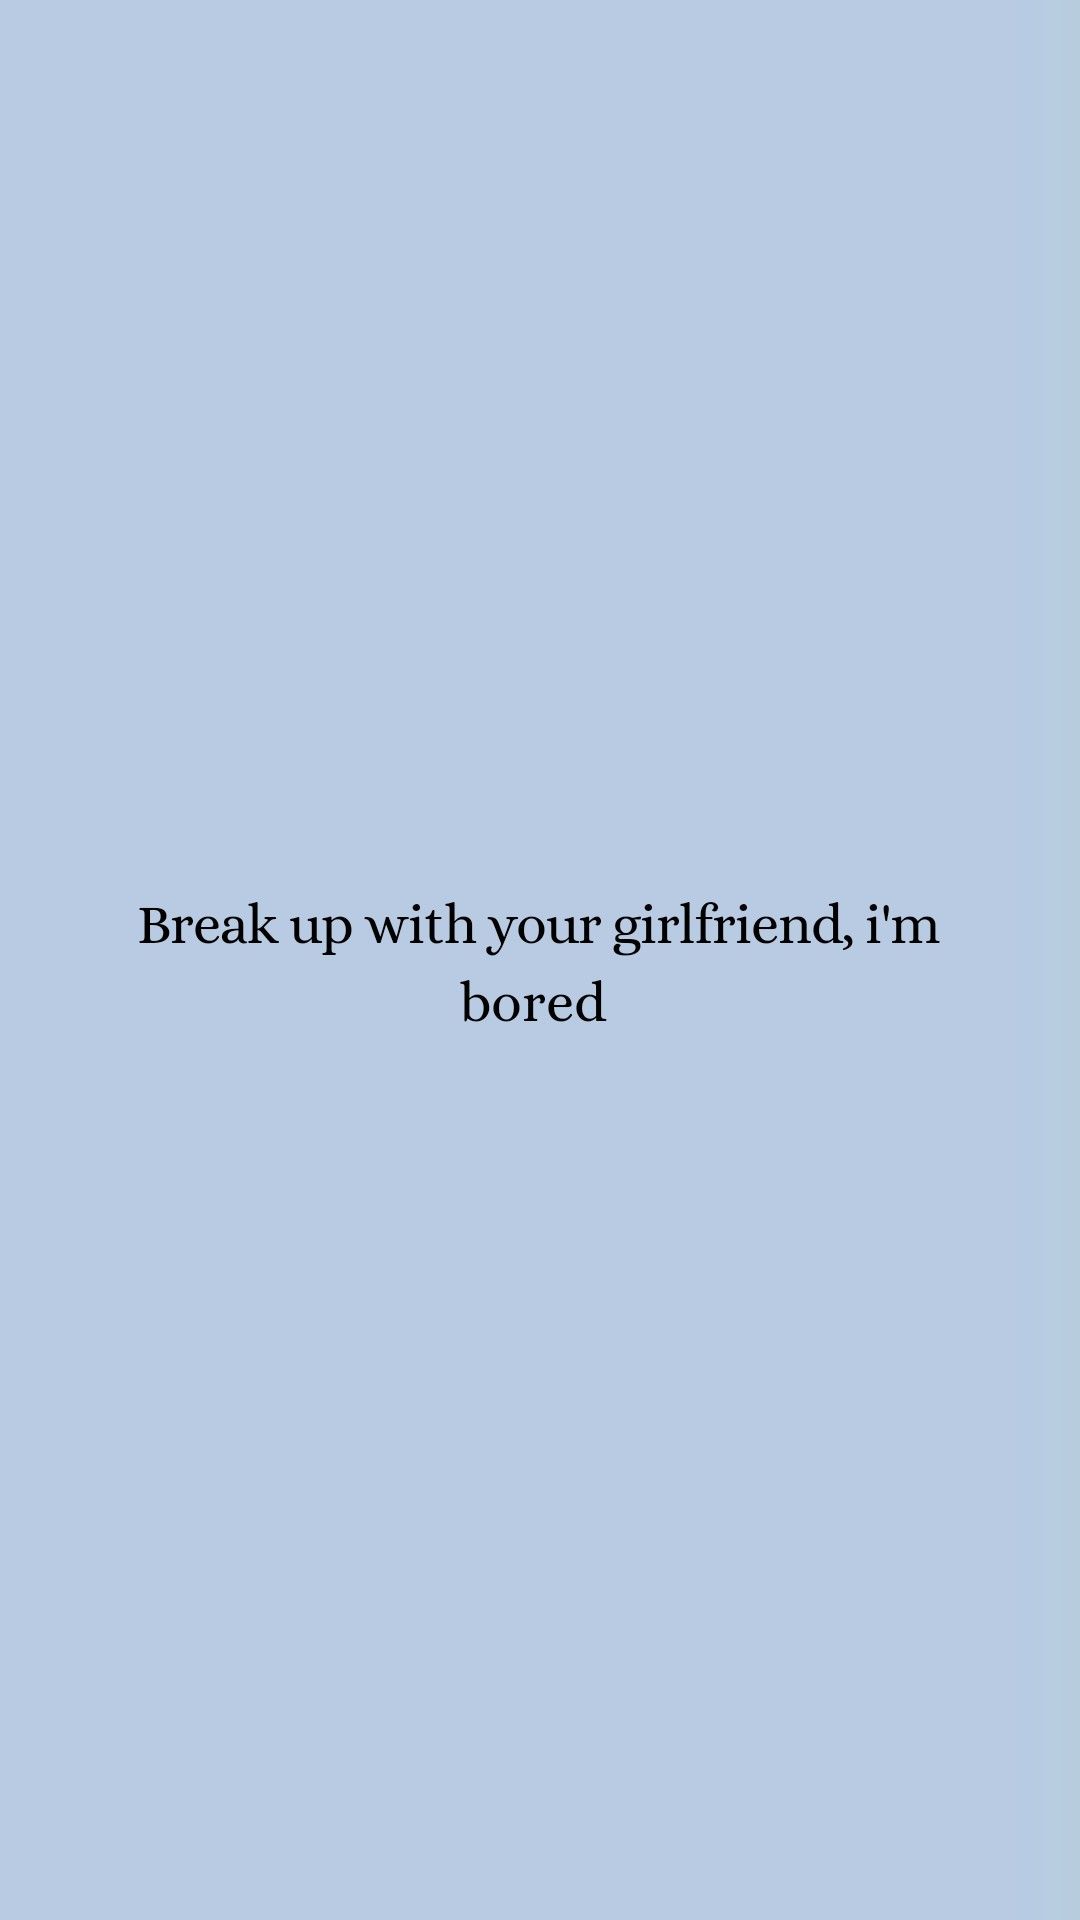 Break Up With Your Girlfriend, I'm bored'